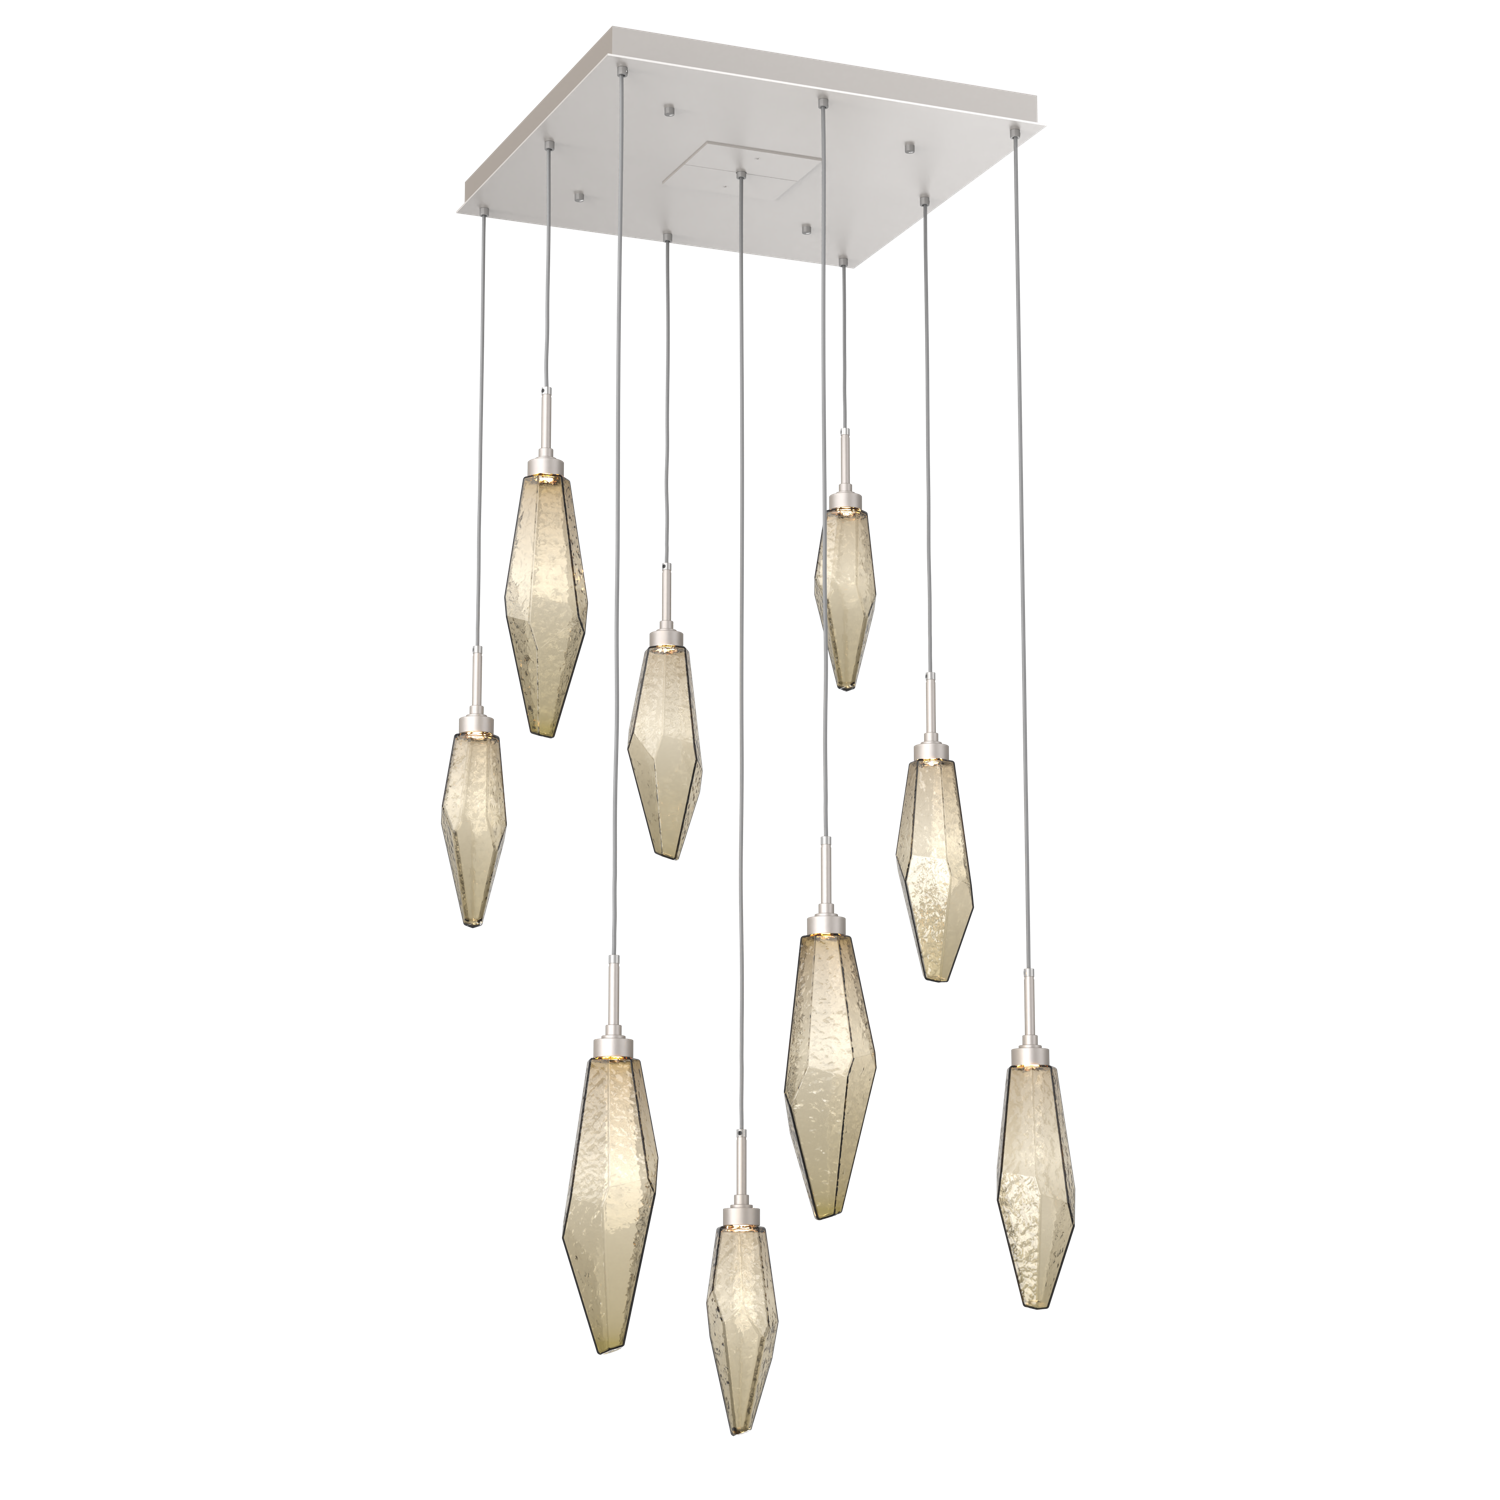 CHB0050-09-BS-CB-Hammerton-Studio-Rock-Crystal-9-light-square-pendant-chandelier-with-beige-silver-finish-and-chilled-bronze-blown-glass-shades-and-LED-lamping